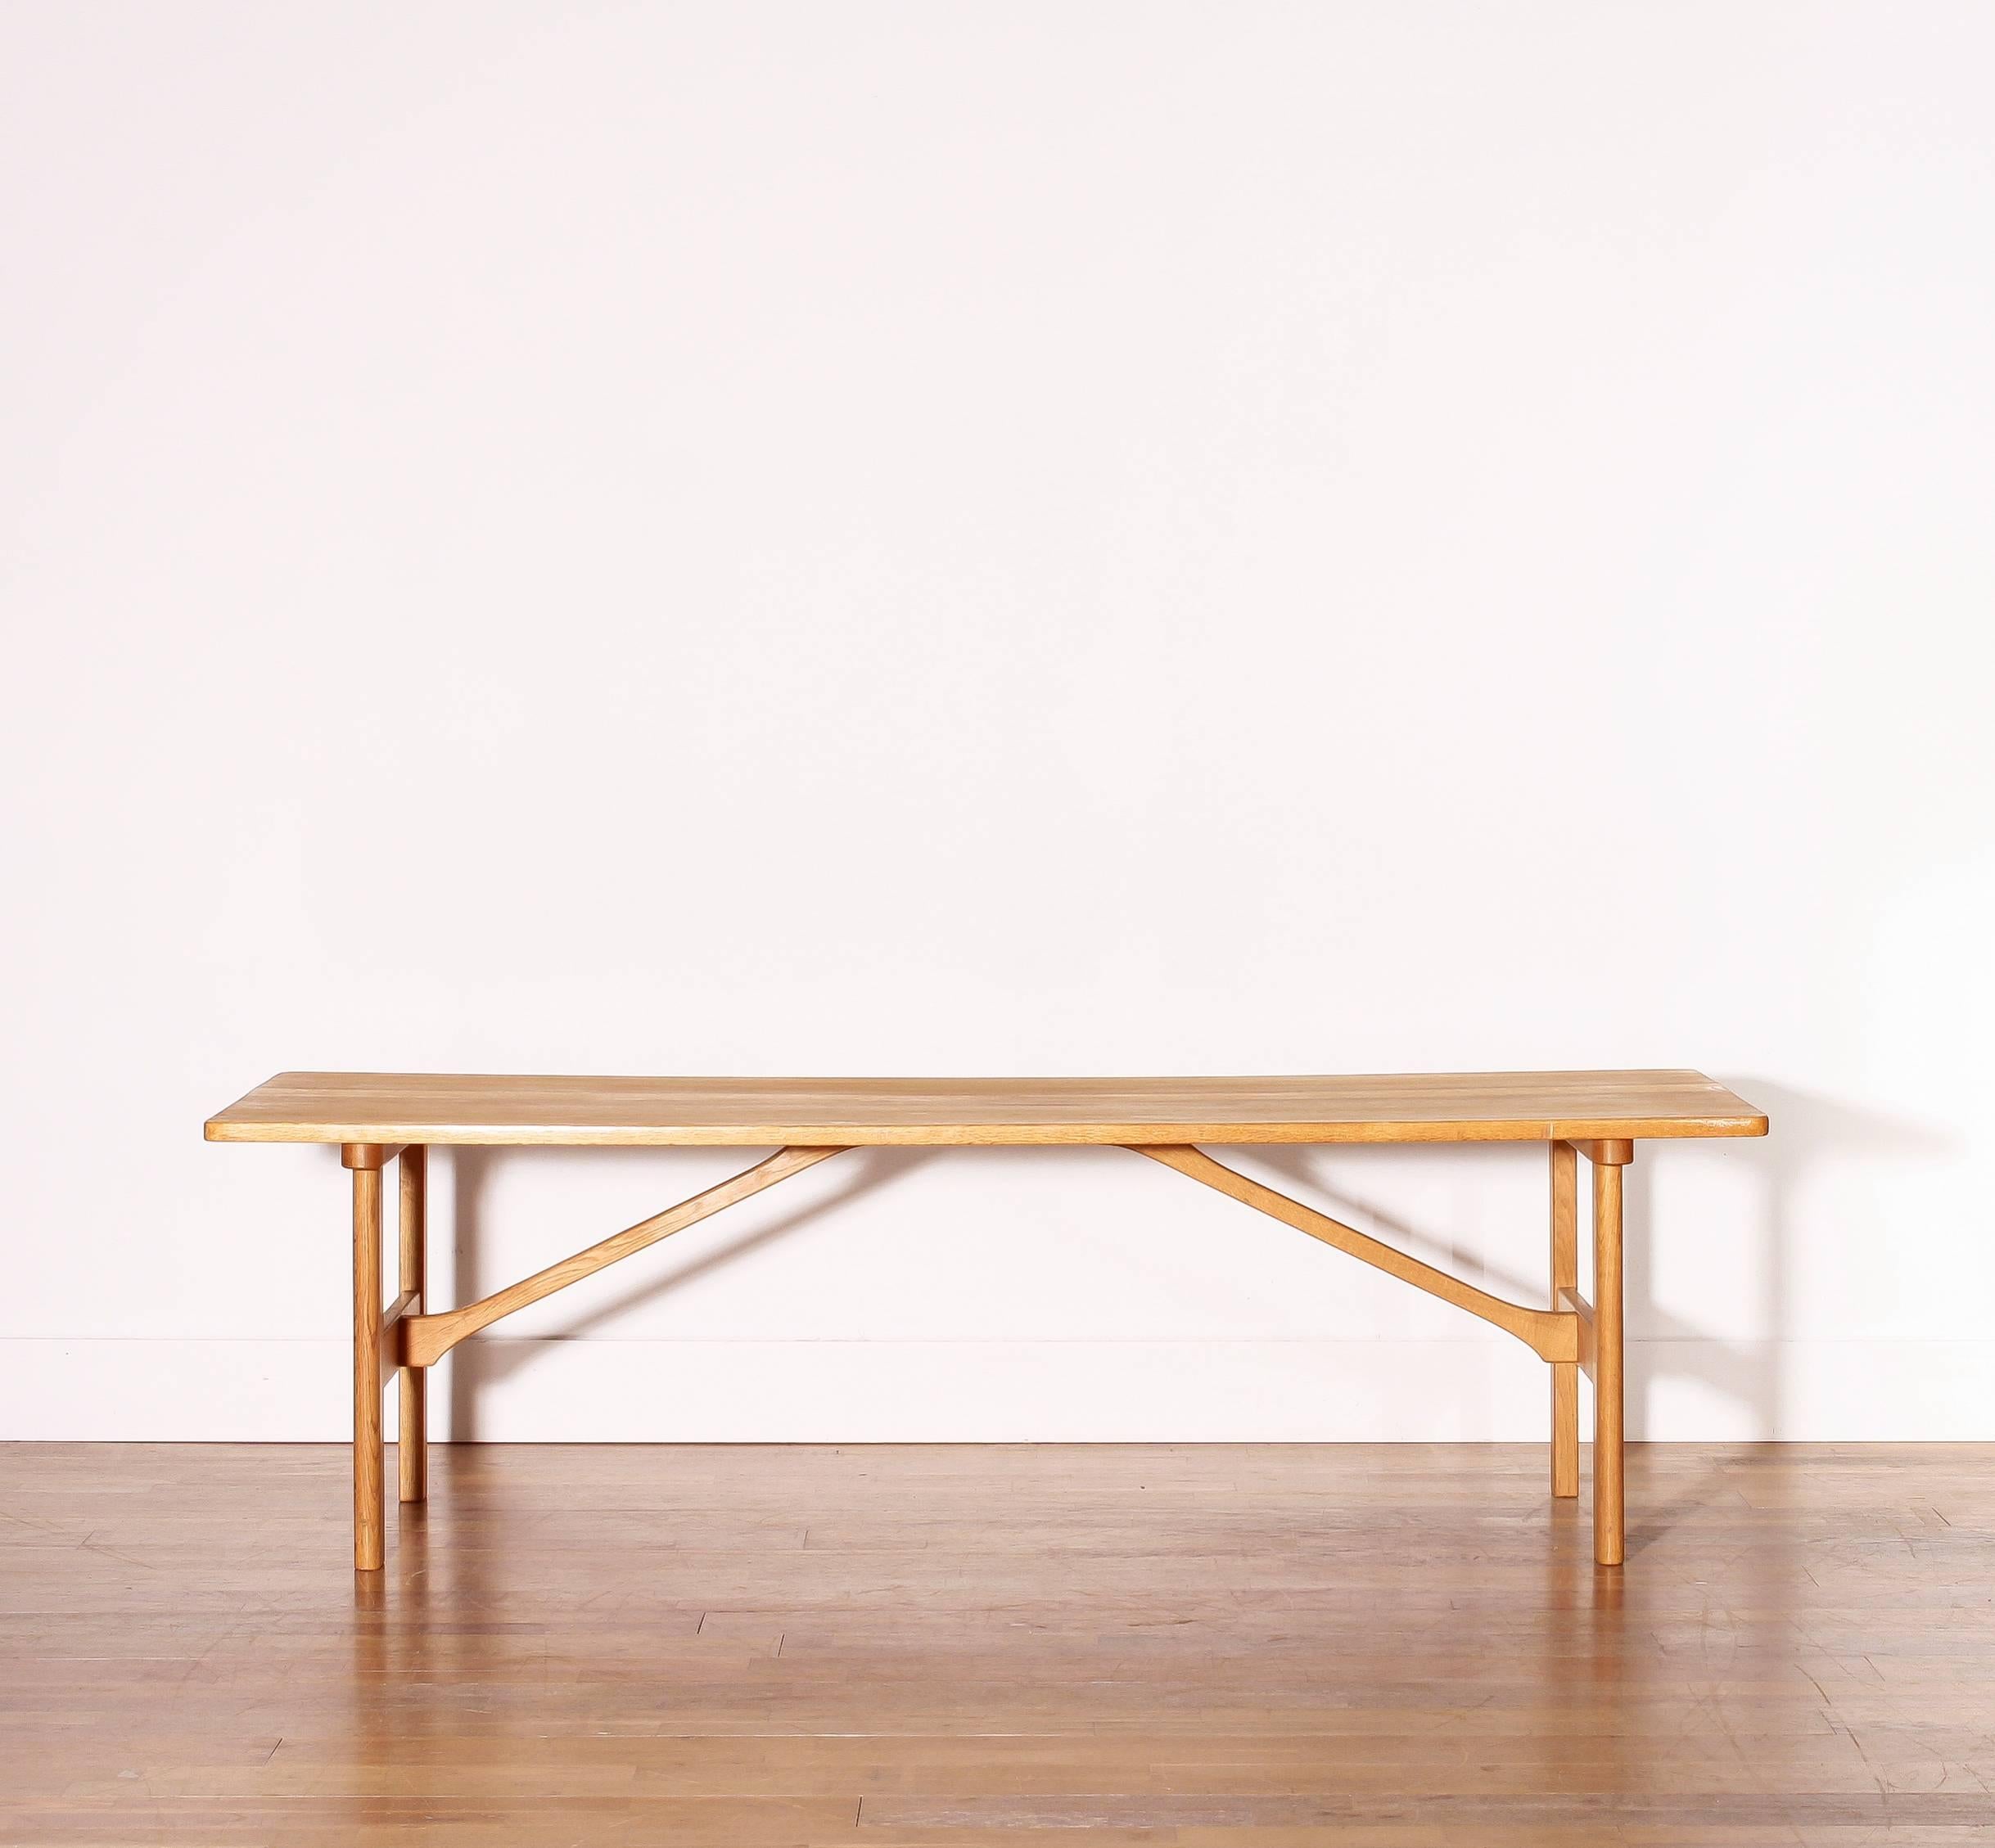 Beautiful large oak coffee table.
This table is designed by Børge Mogensen for Fredericia.
Period 1950-1959.
The dimensions are: H 53 cm, W 180 cm, D 69 cm.